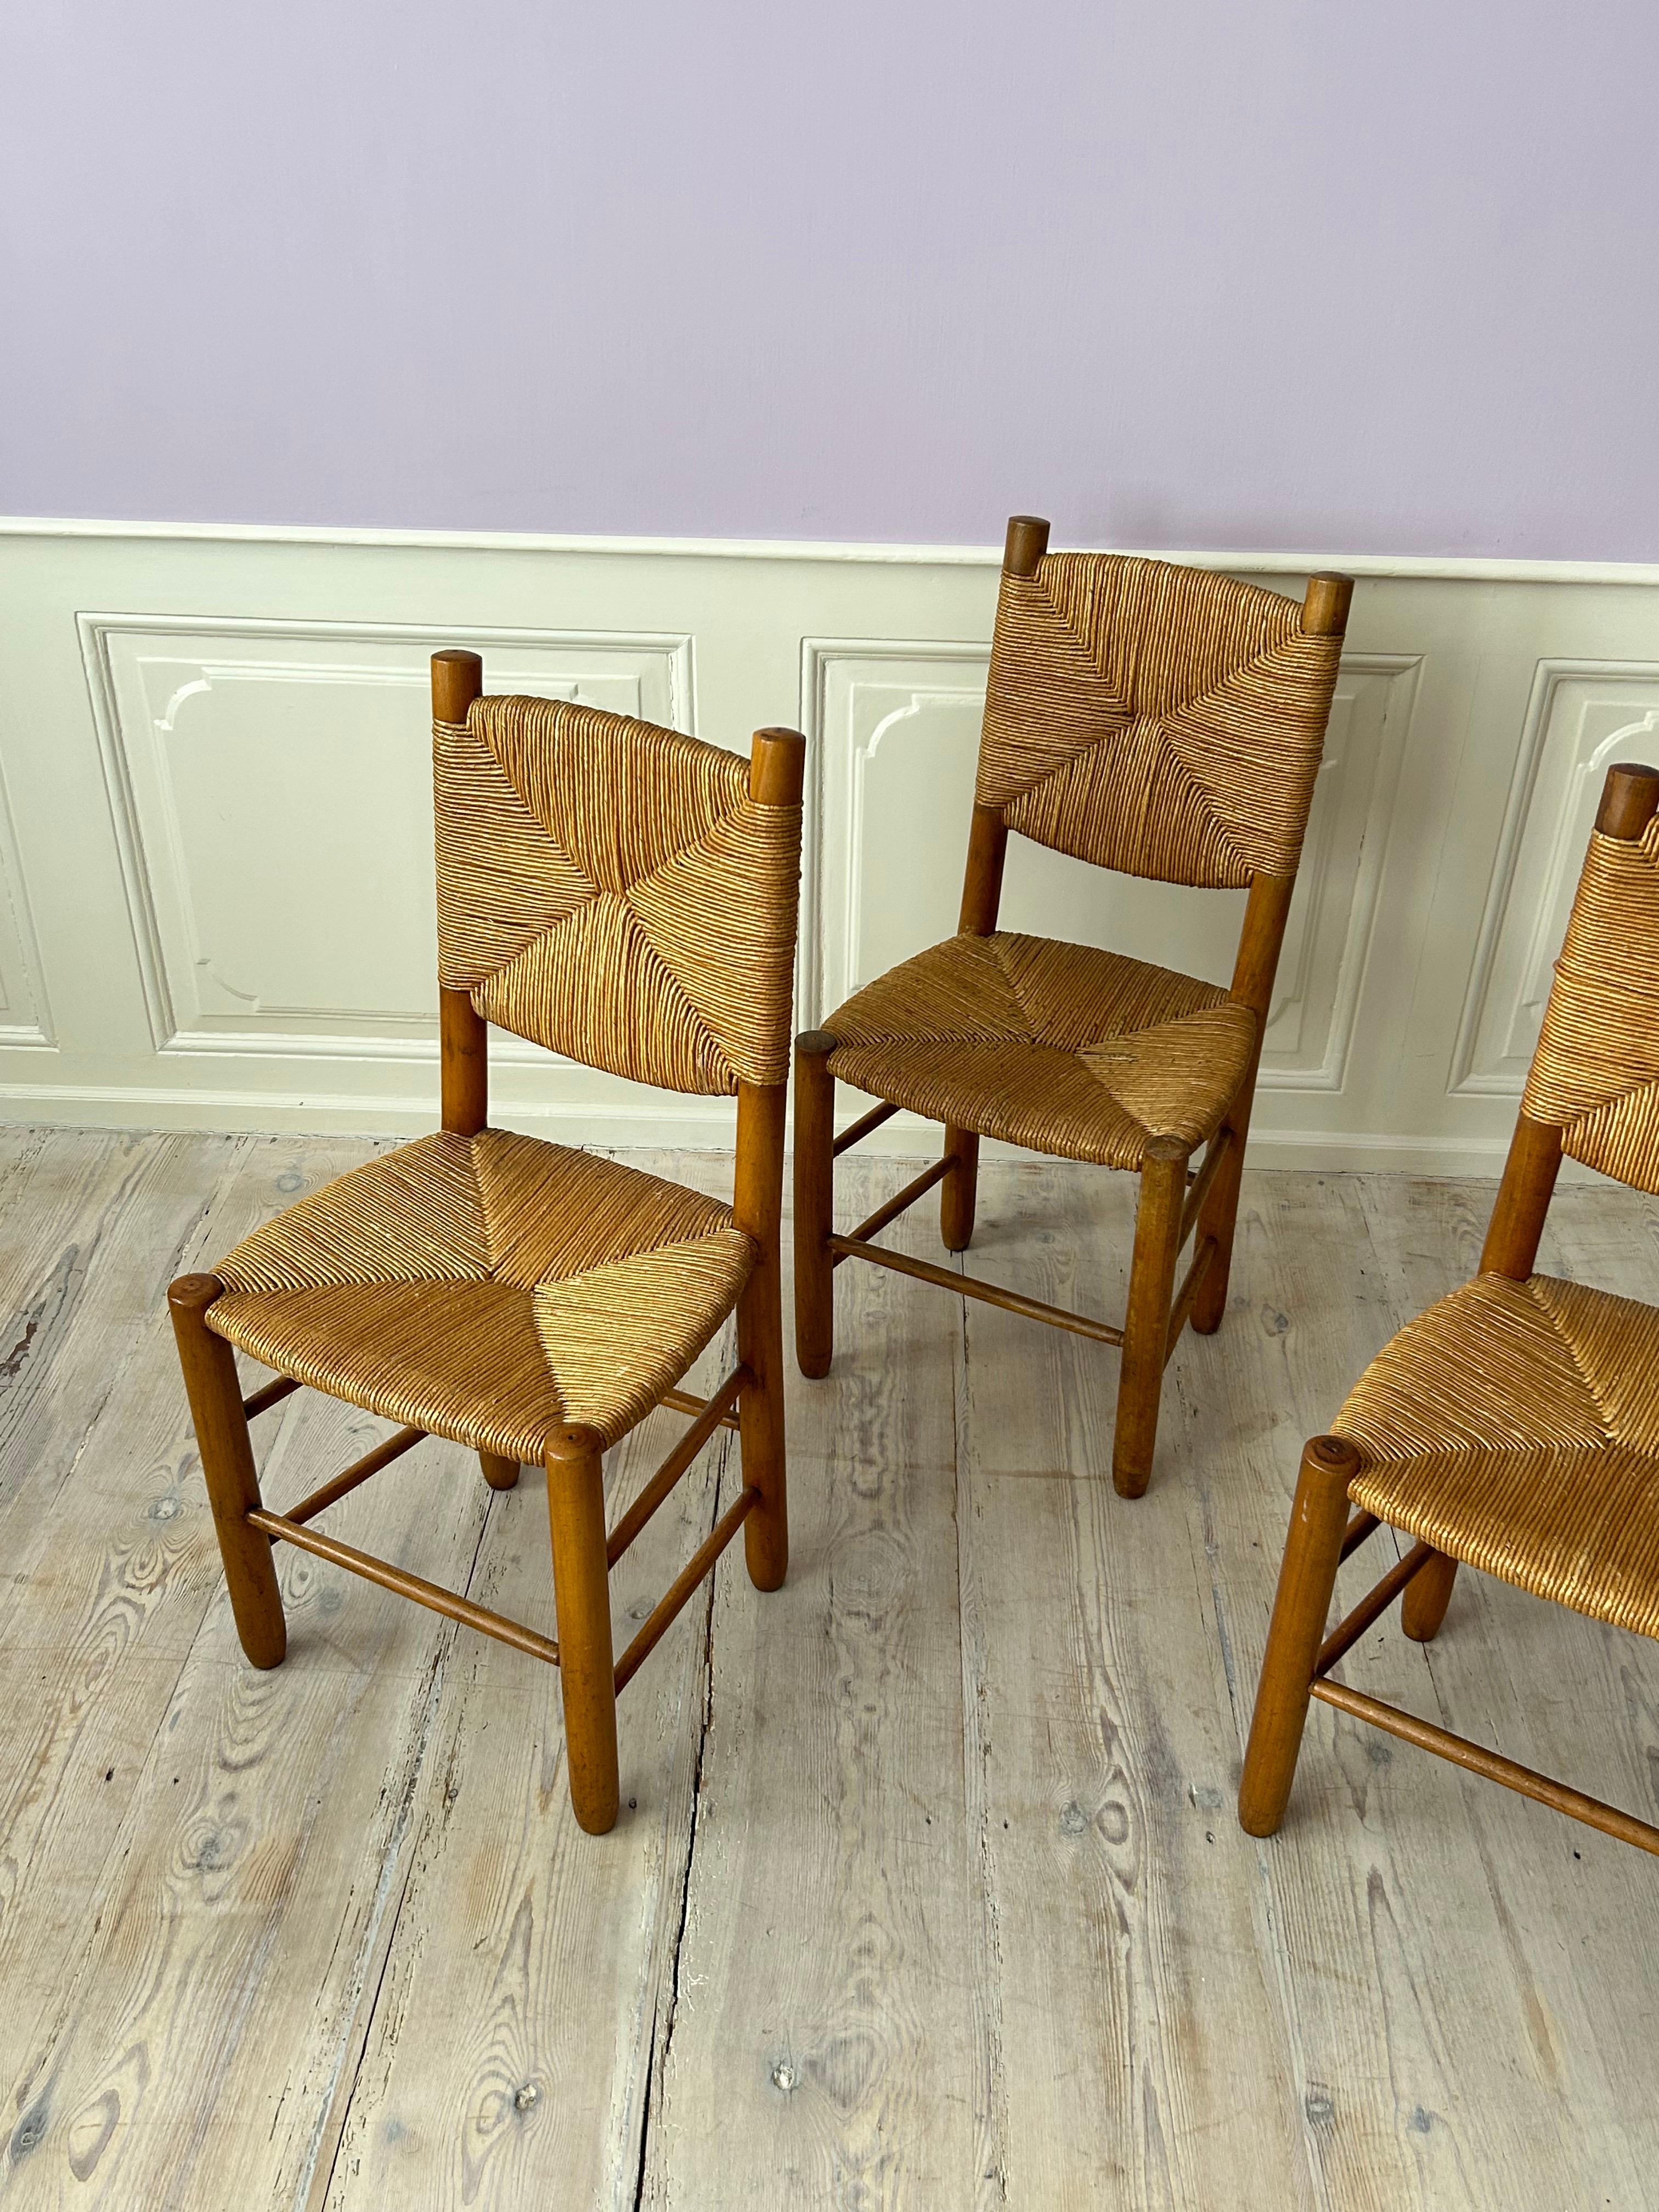 Vintage Set of Four Chairs in Ash and Straw, France, 1950s For Sale 1